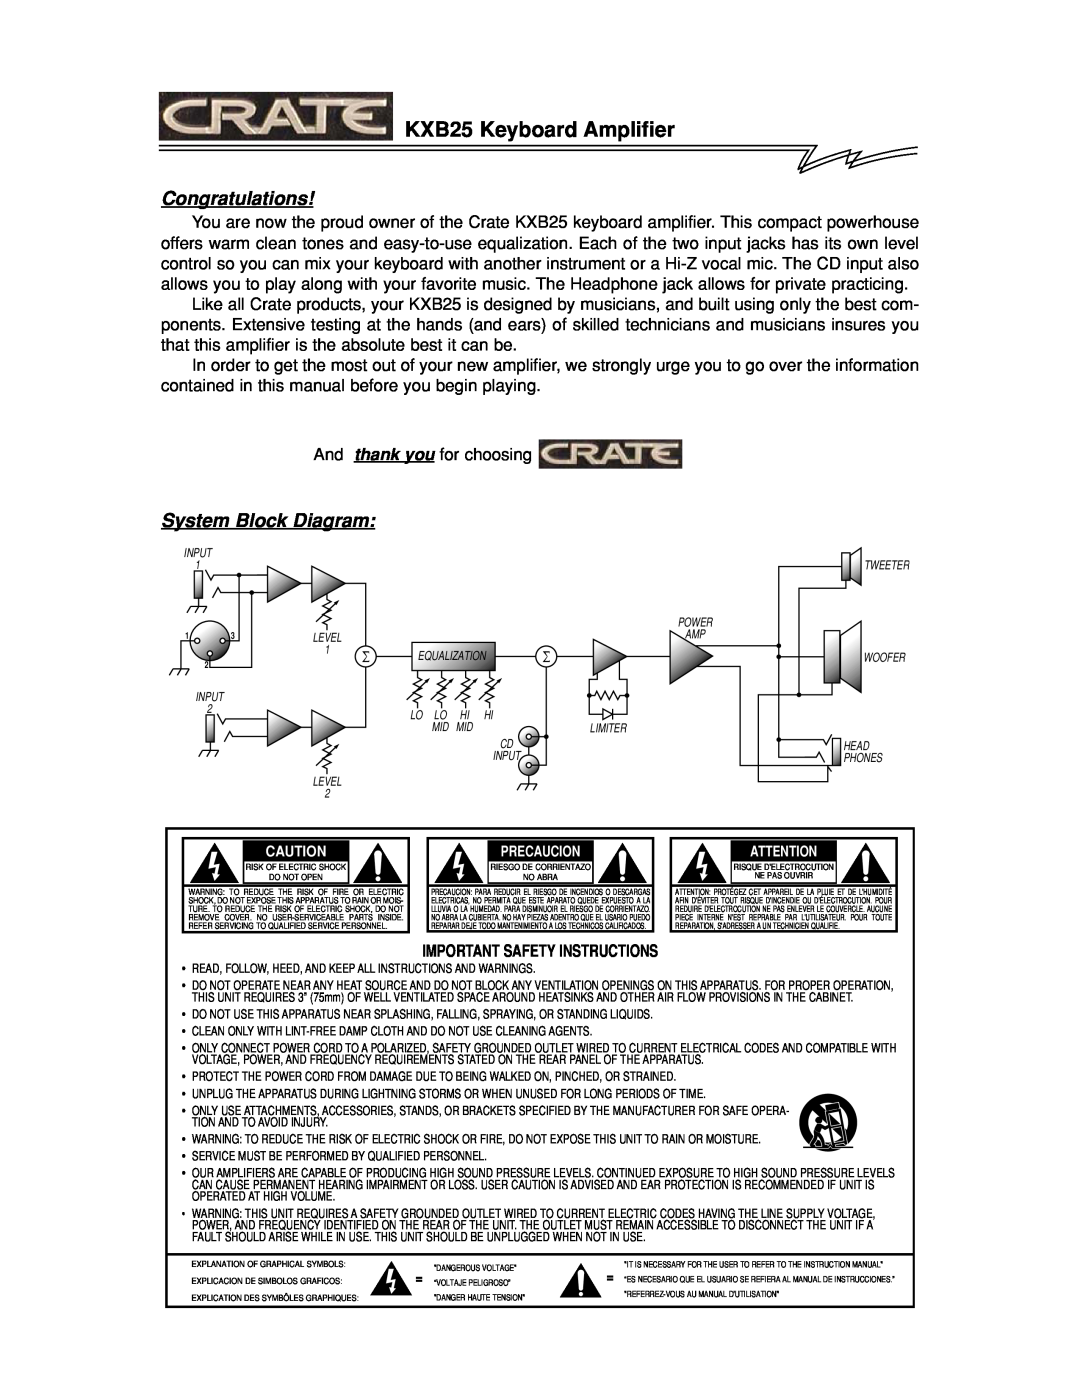 Crate Amplifiers manual KXB25 Keyboard Amplifier, Congratulations, System Block Diagram, Important Safety Instructions 